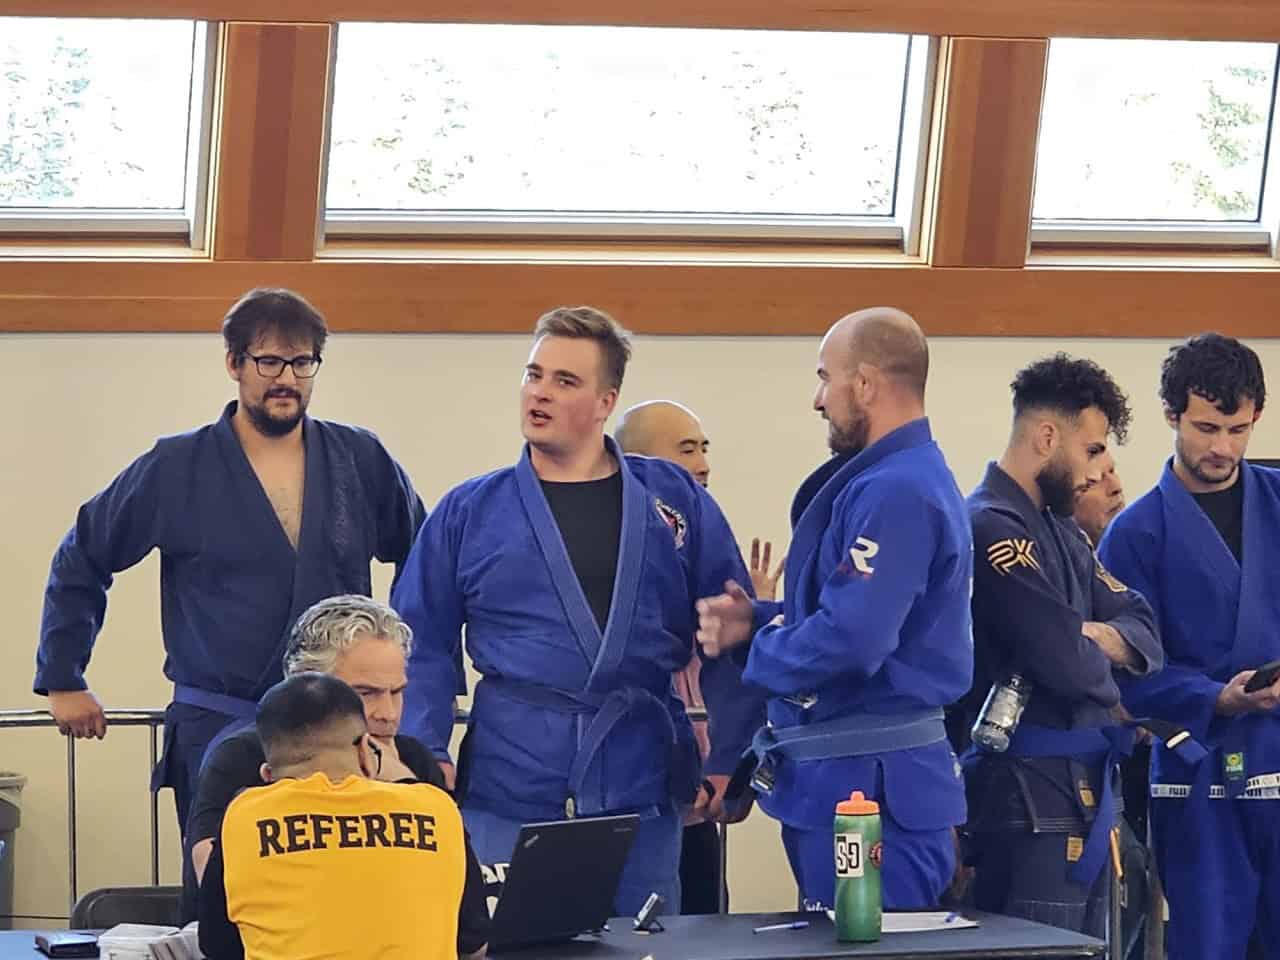 Grappling Competitors - Banff Alberta Canada - Amazing competitors at the Darkhorse Grappling Tournament in Banff, Alberta, Canada.
Traveling to different towns for events is a great way to meet new folks both in the sport or spectators. It is like camping in an arena for a day!